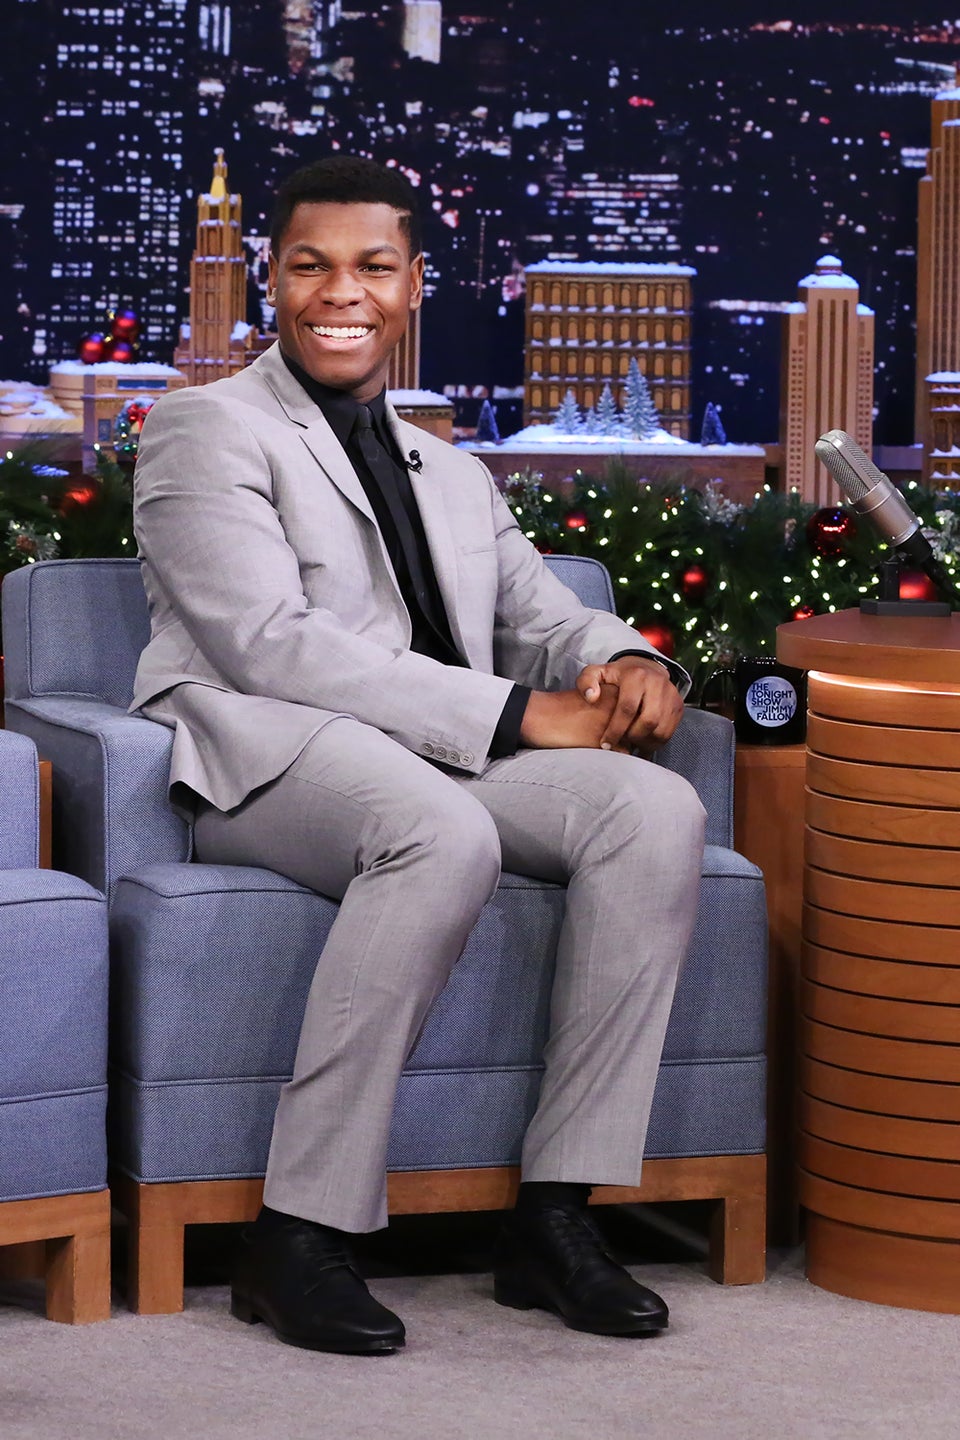 ‘Star Wars: The Force Awakens’ Star John Boyega Says His Friends Thought He Was An Extra